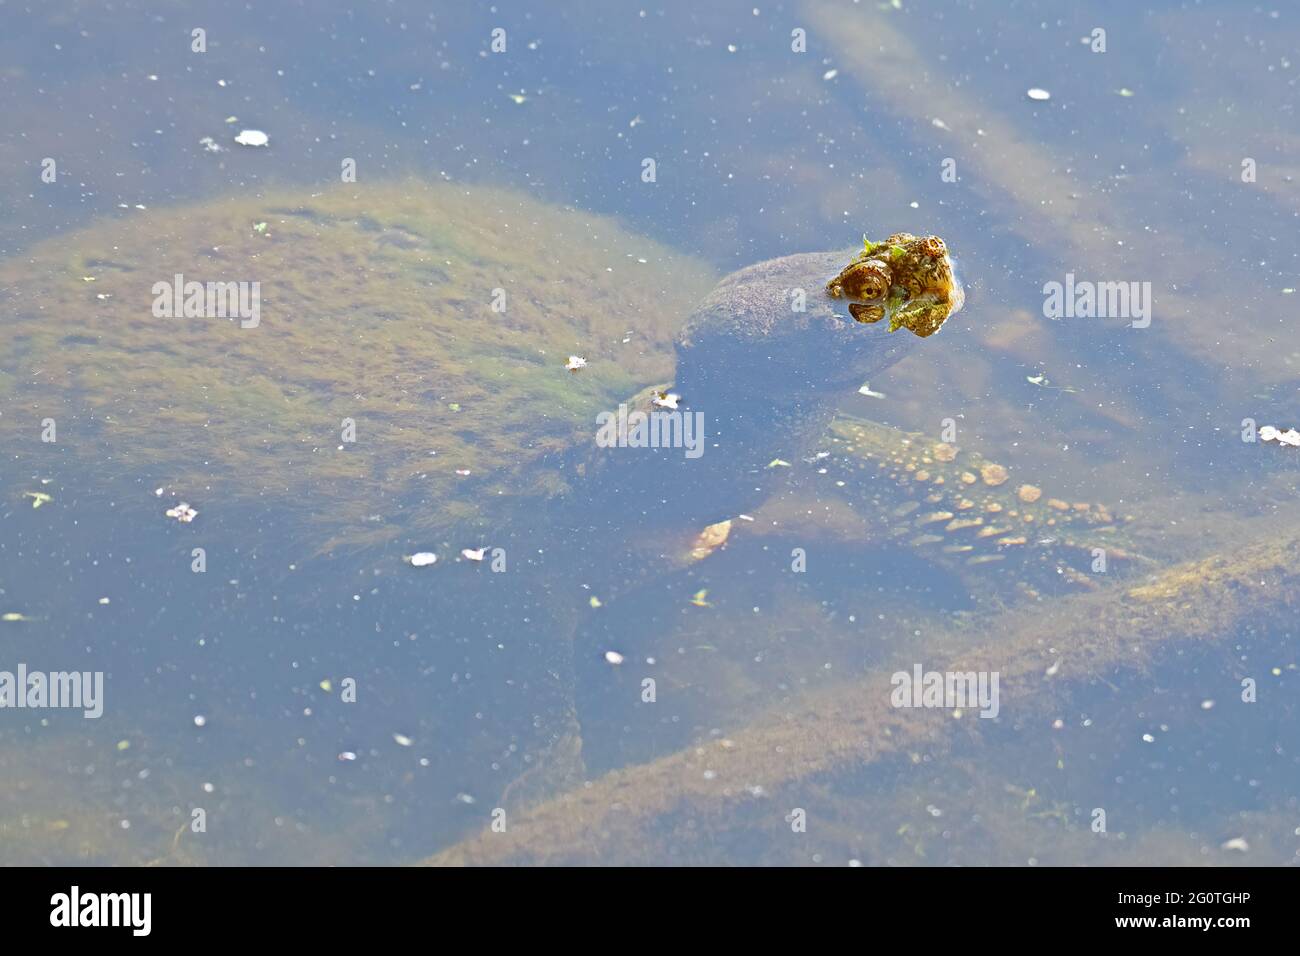 Snapping turtle (chelydra serpentina) underwater with part of its face above the water surface Stock Photo